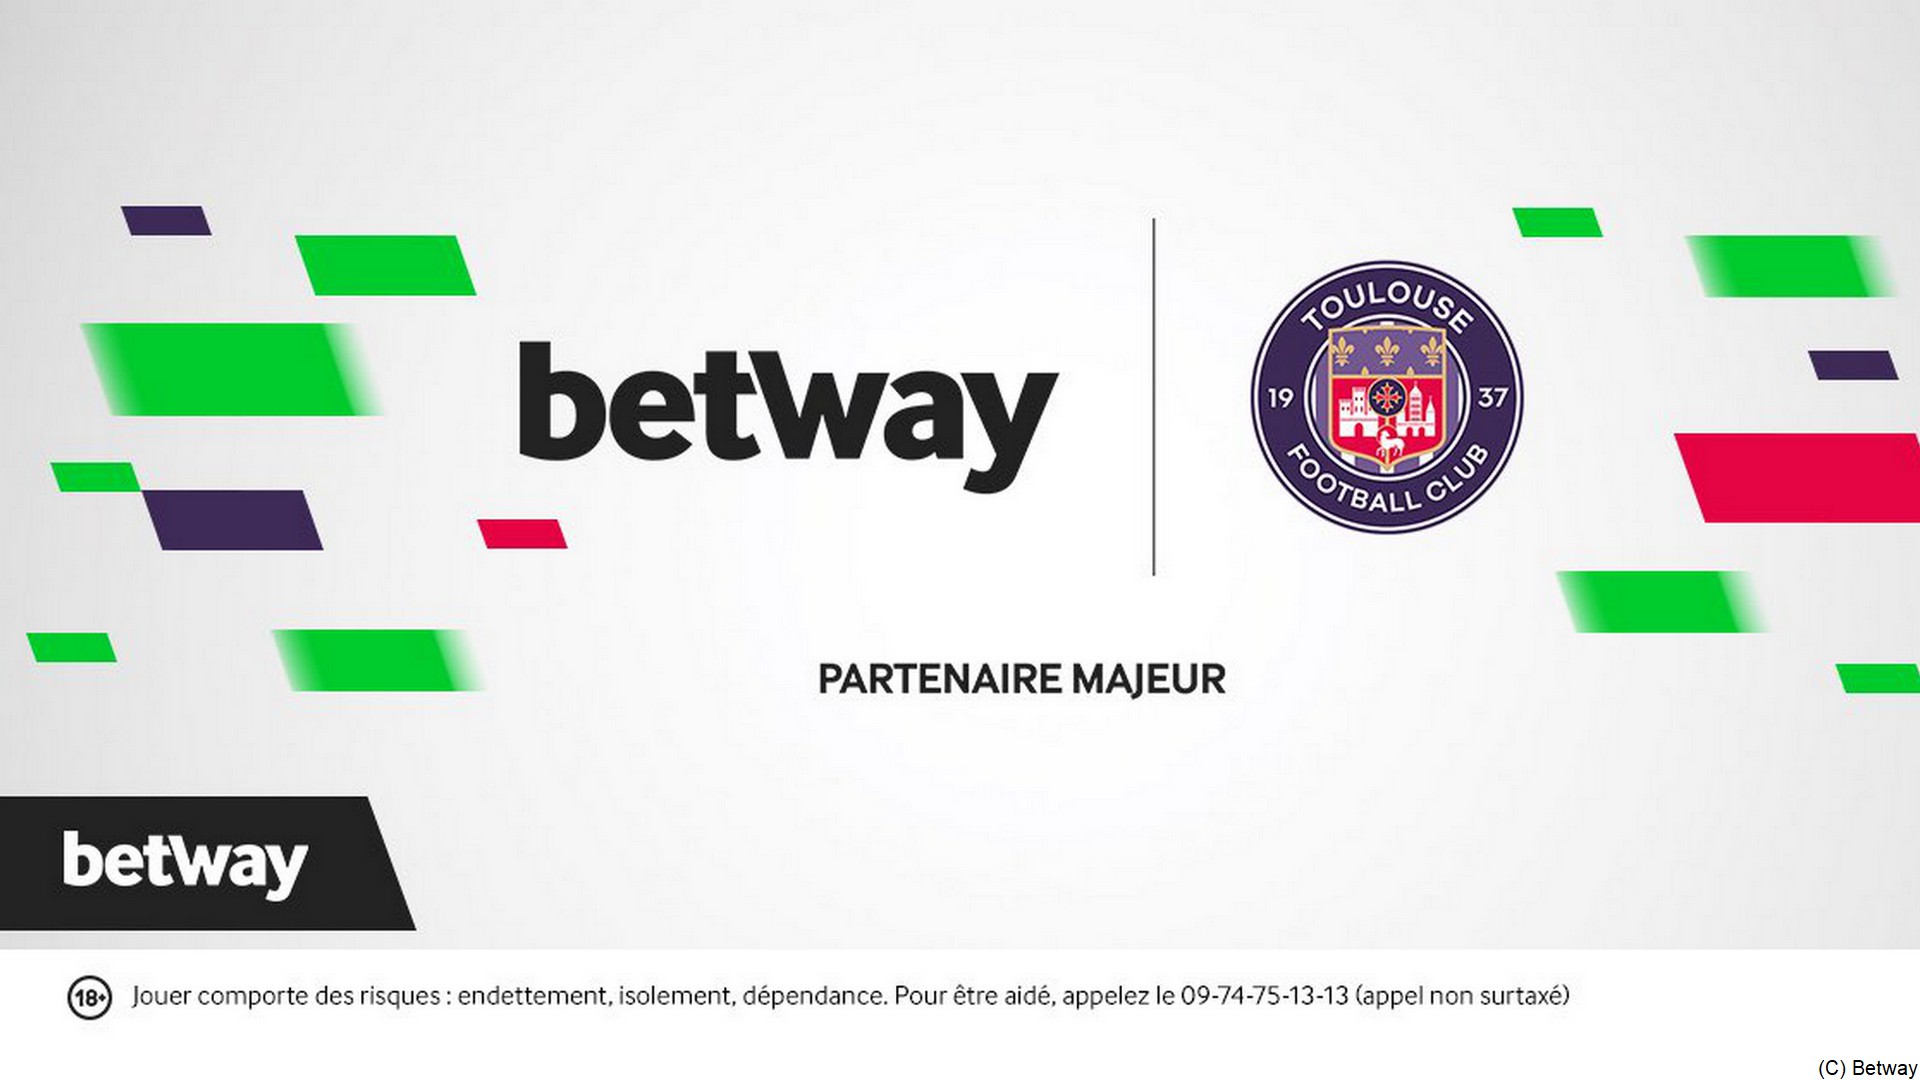 Betway Toulouse Football Club